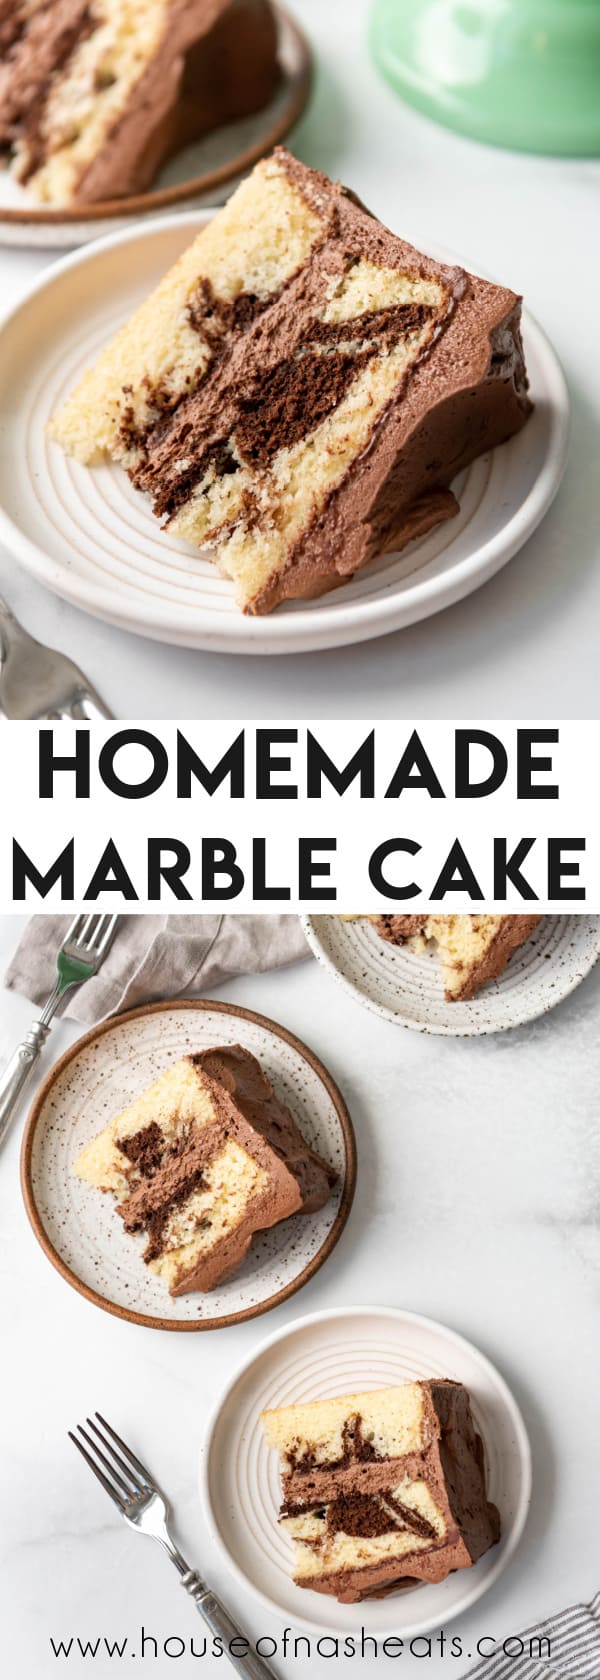 A collage of images of marble cake with text overlay.